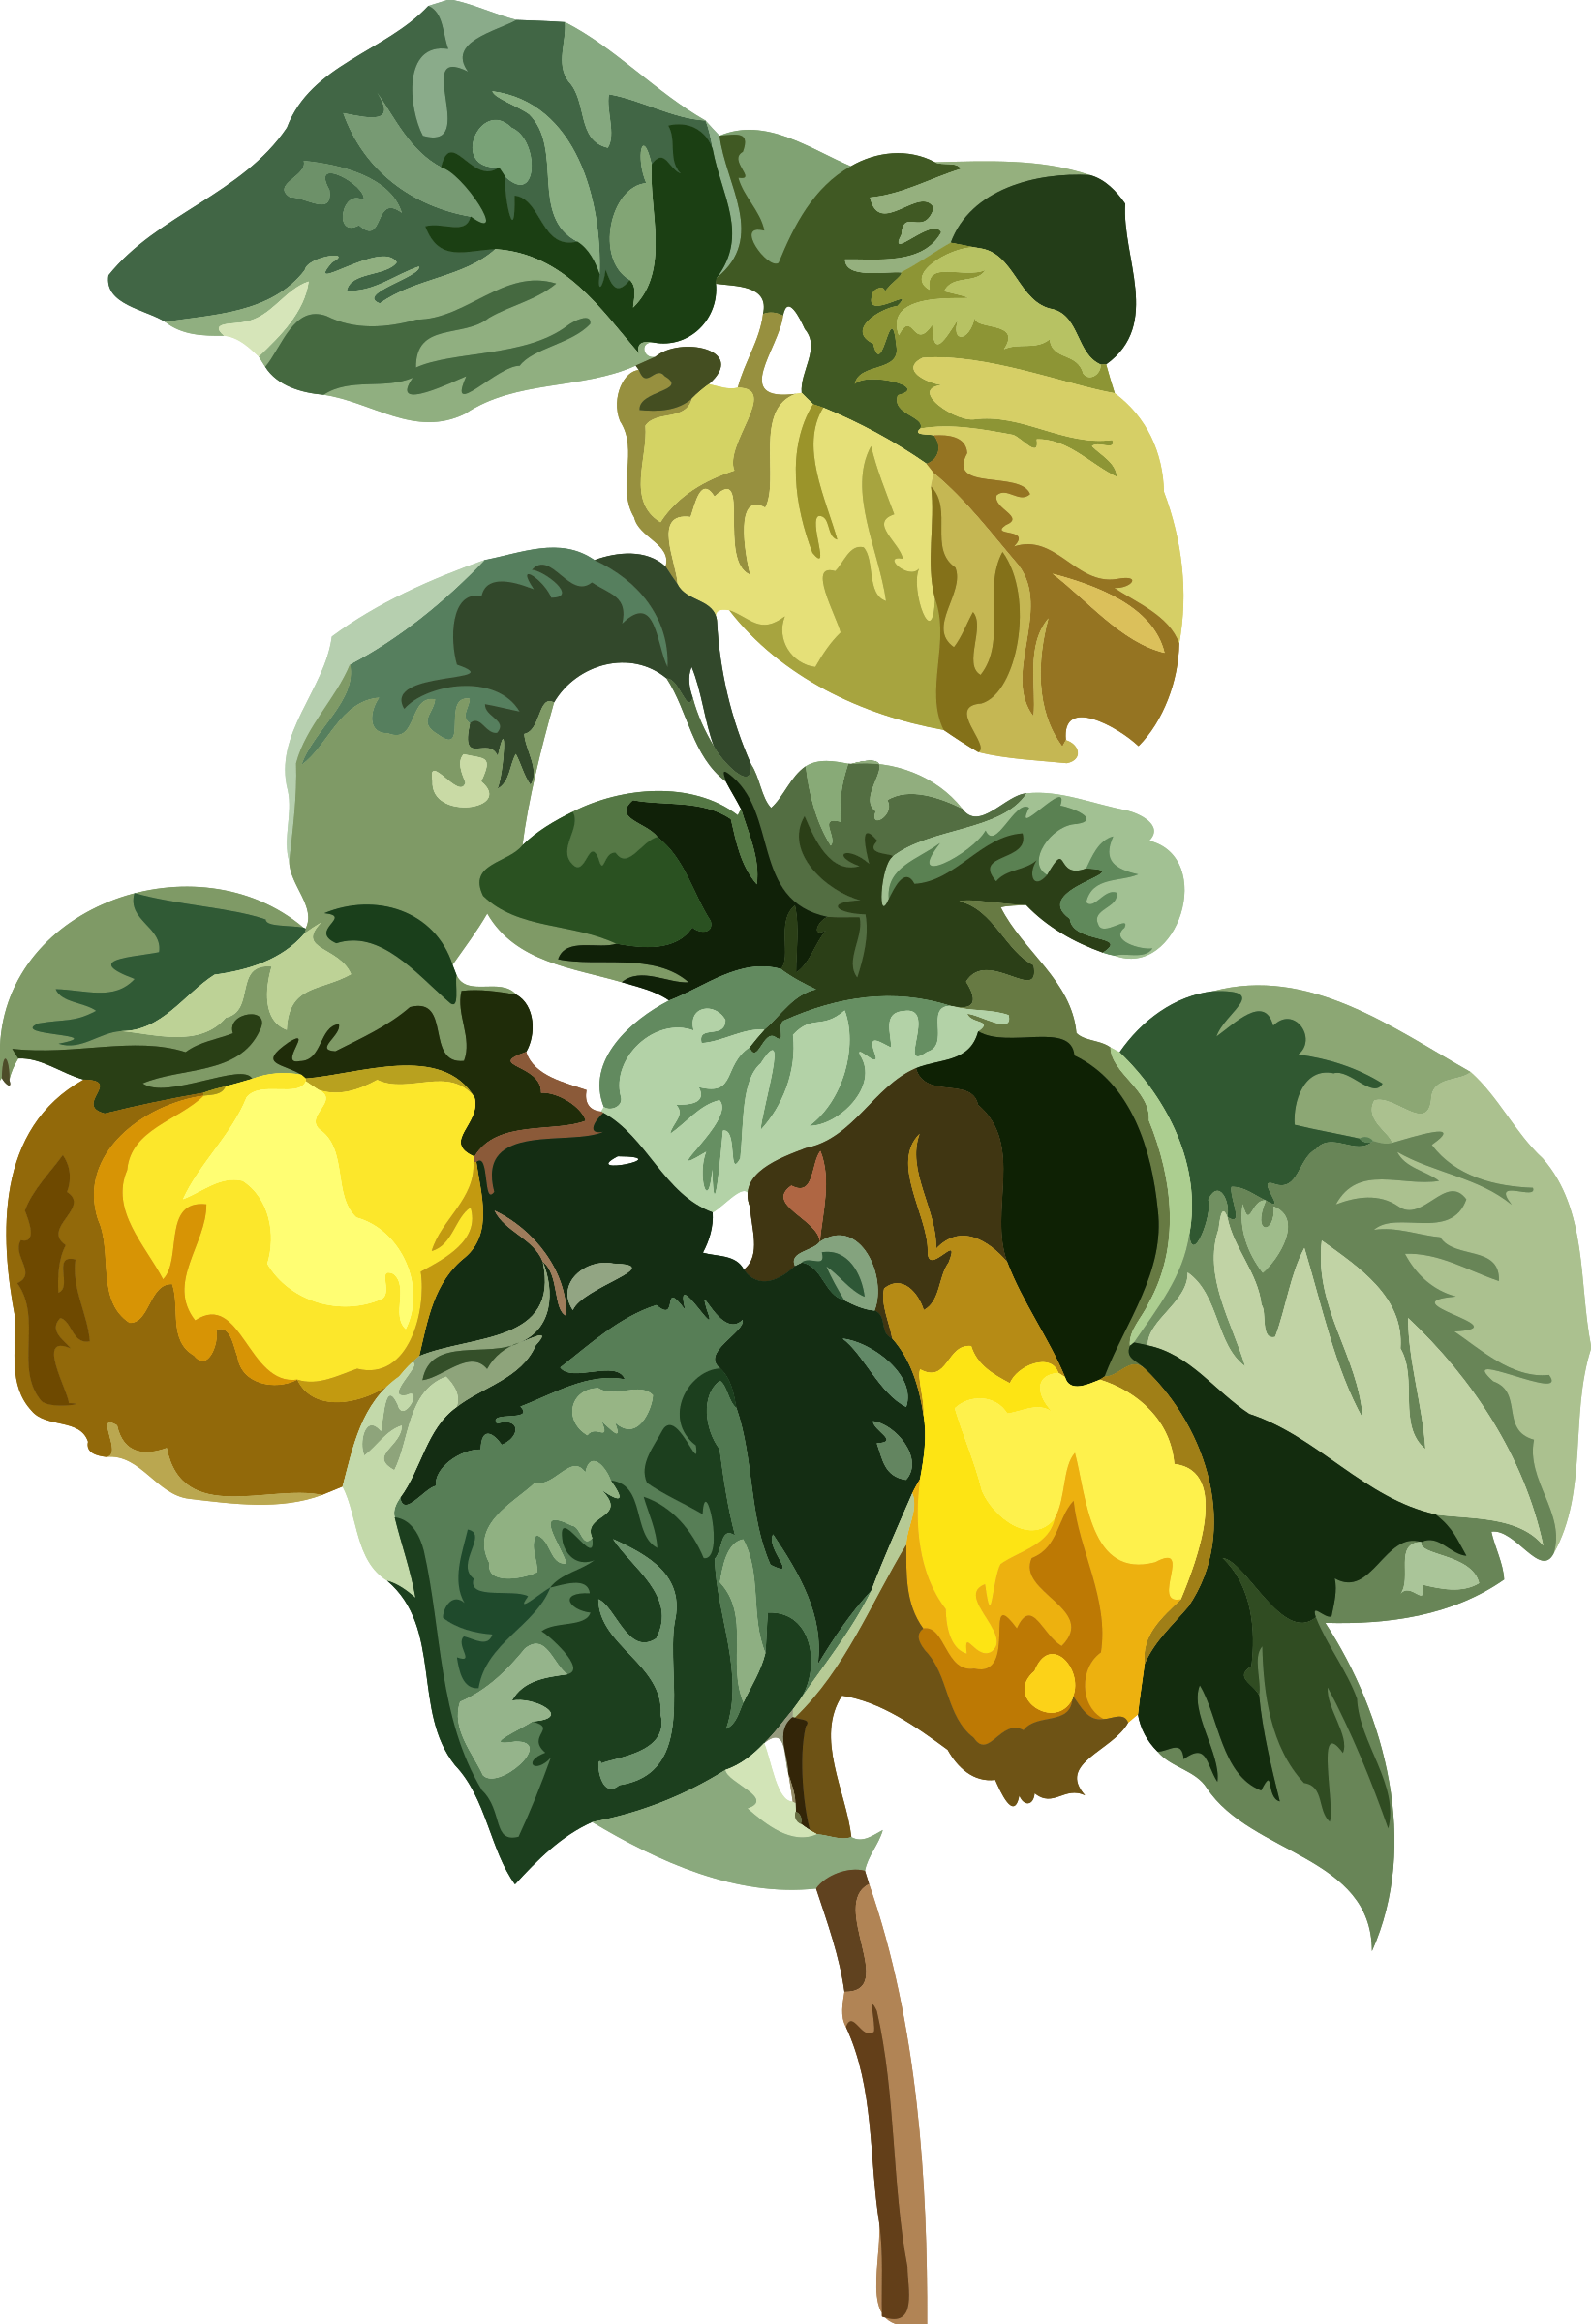 Download and share clipart about Quince By @firkin, Lower Resolution Versio...